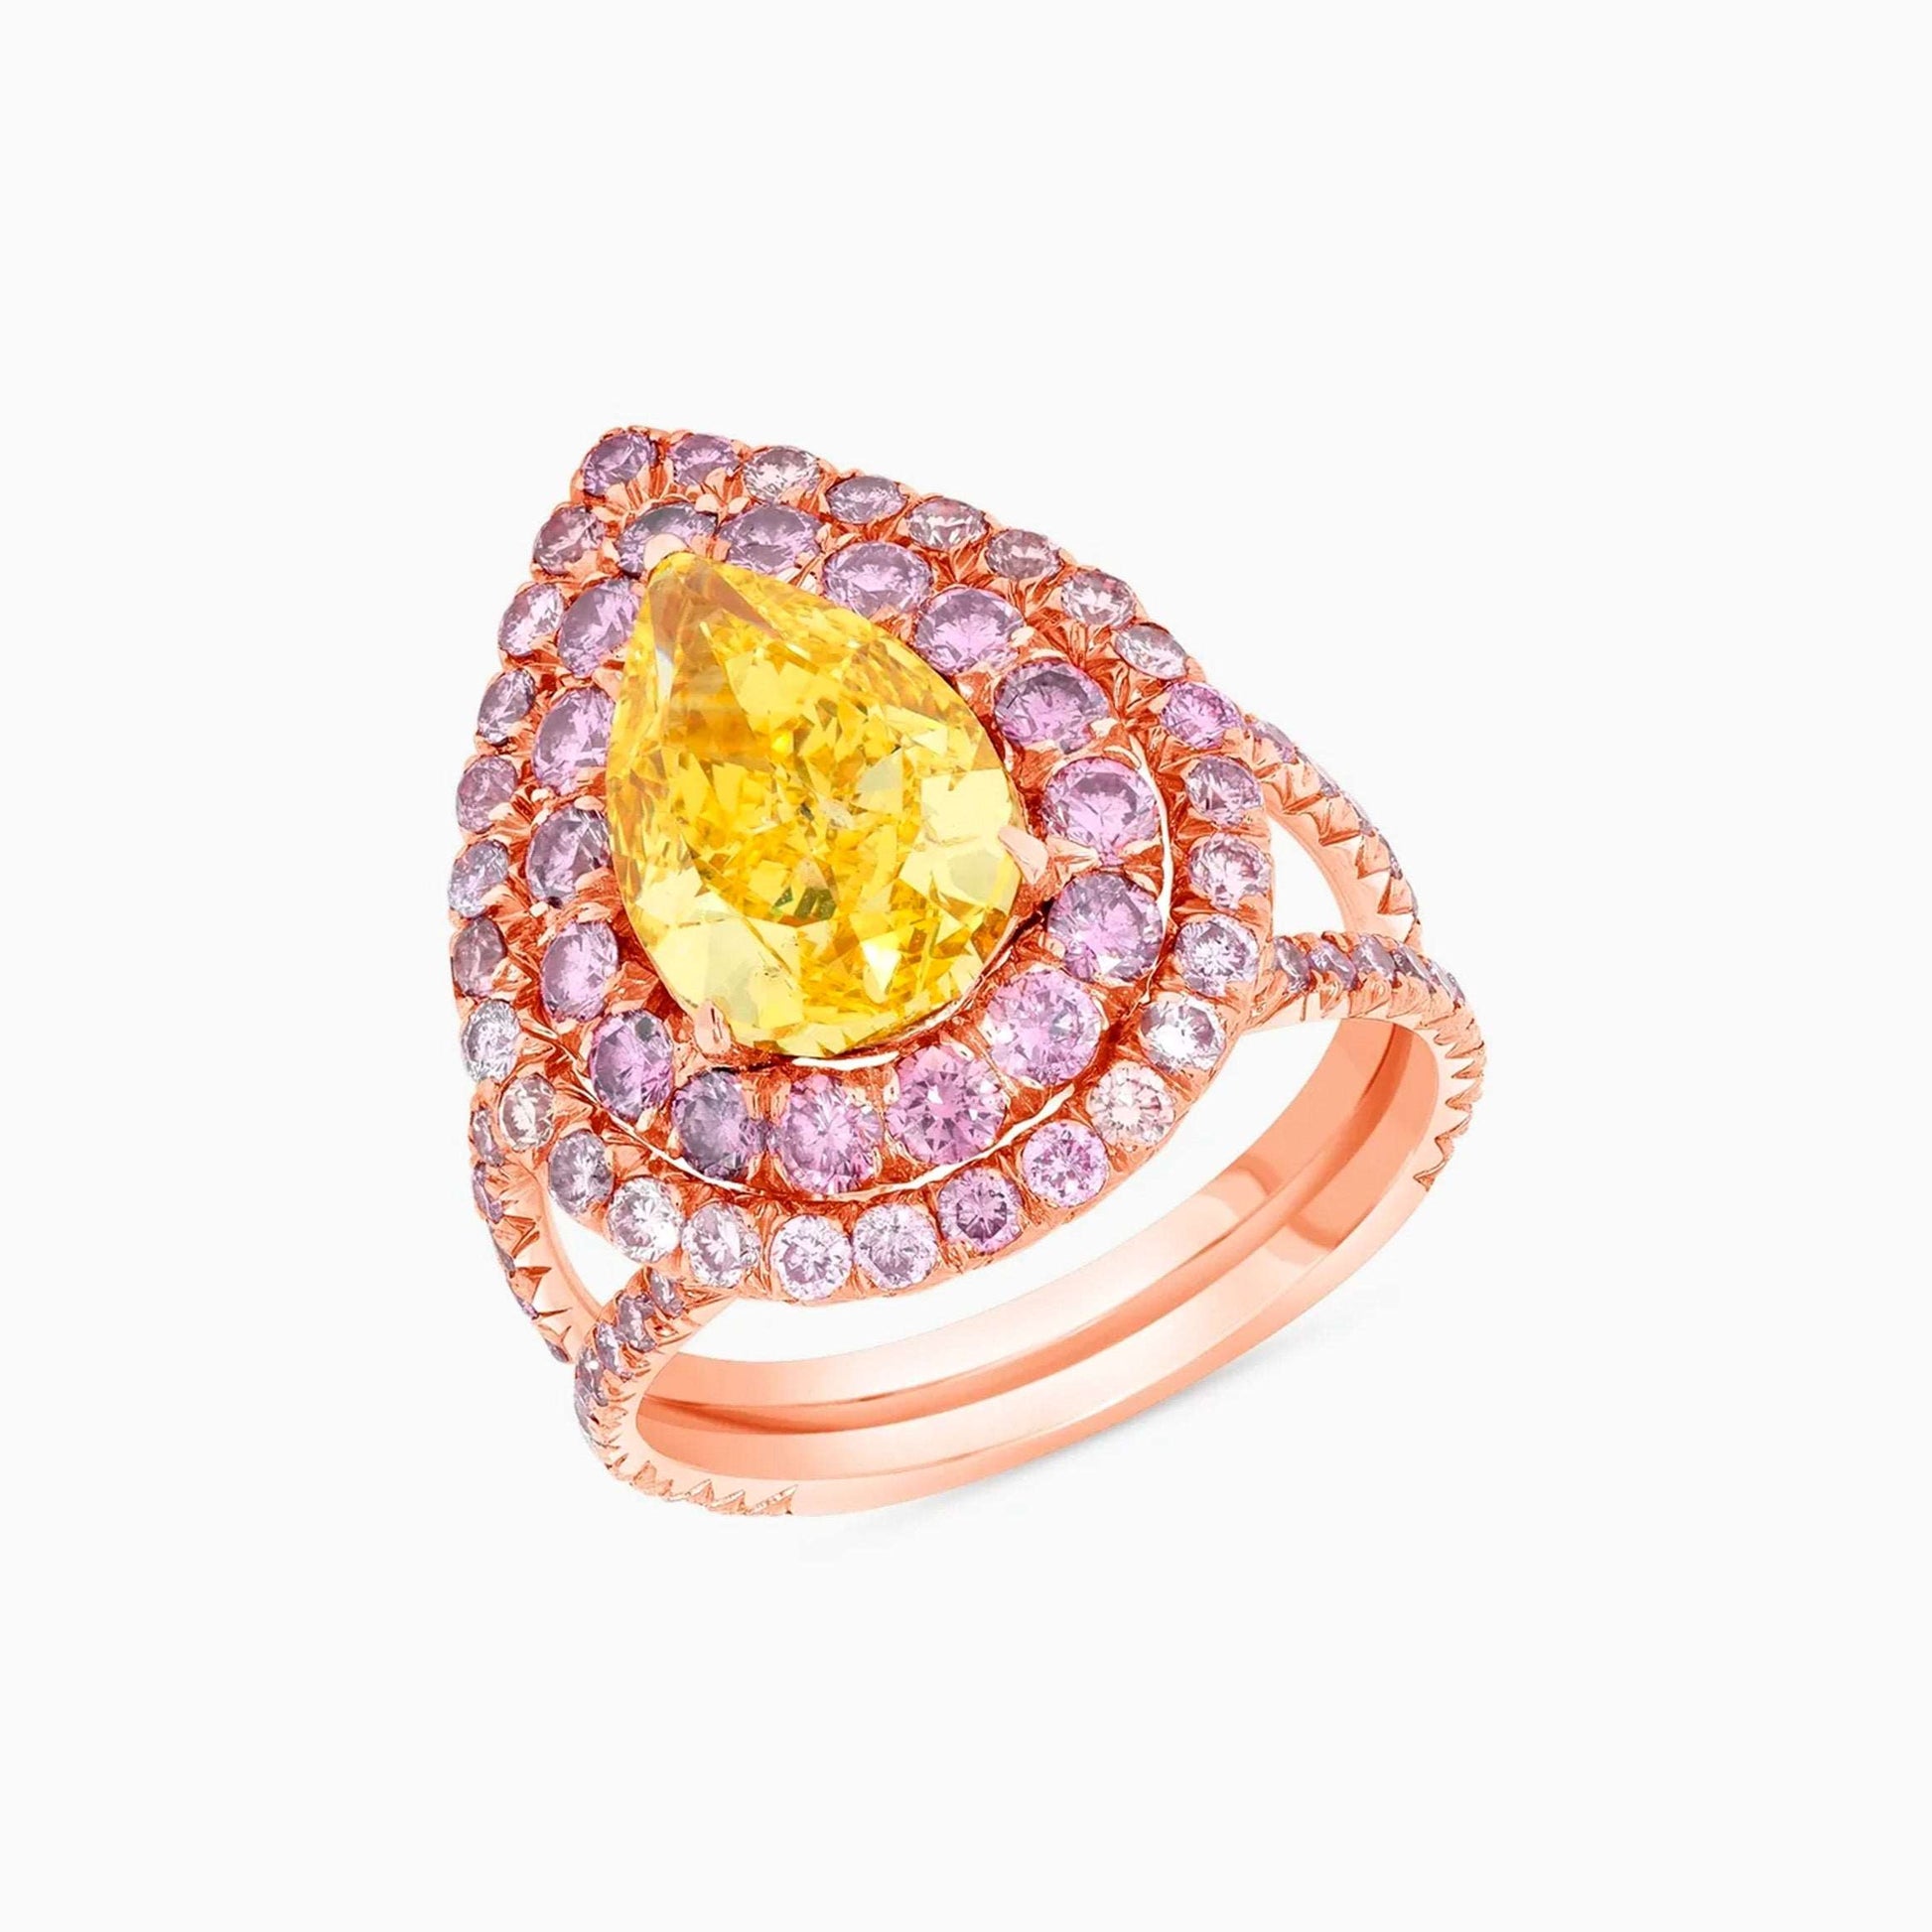 Vivid Yellow & Pink Diamond Rose Gold Ring on a white background